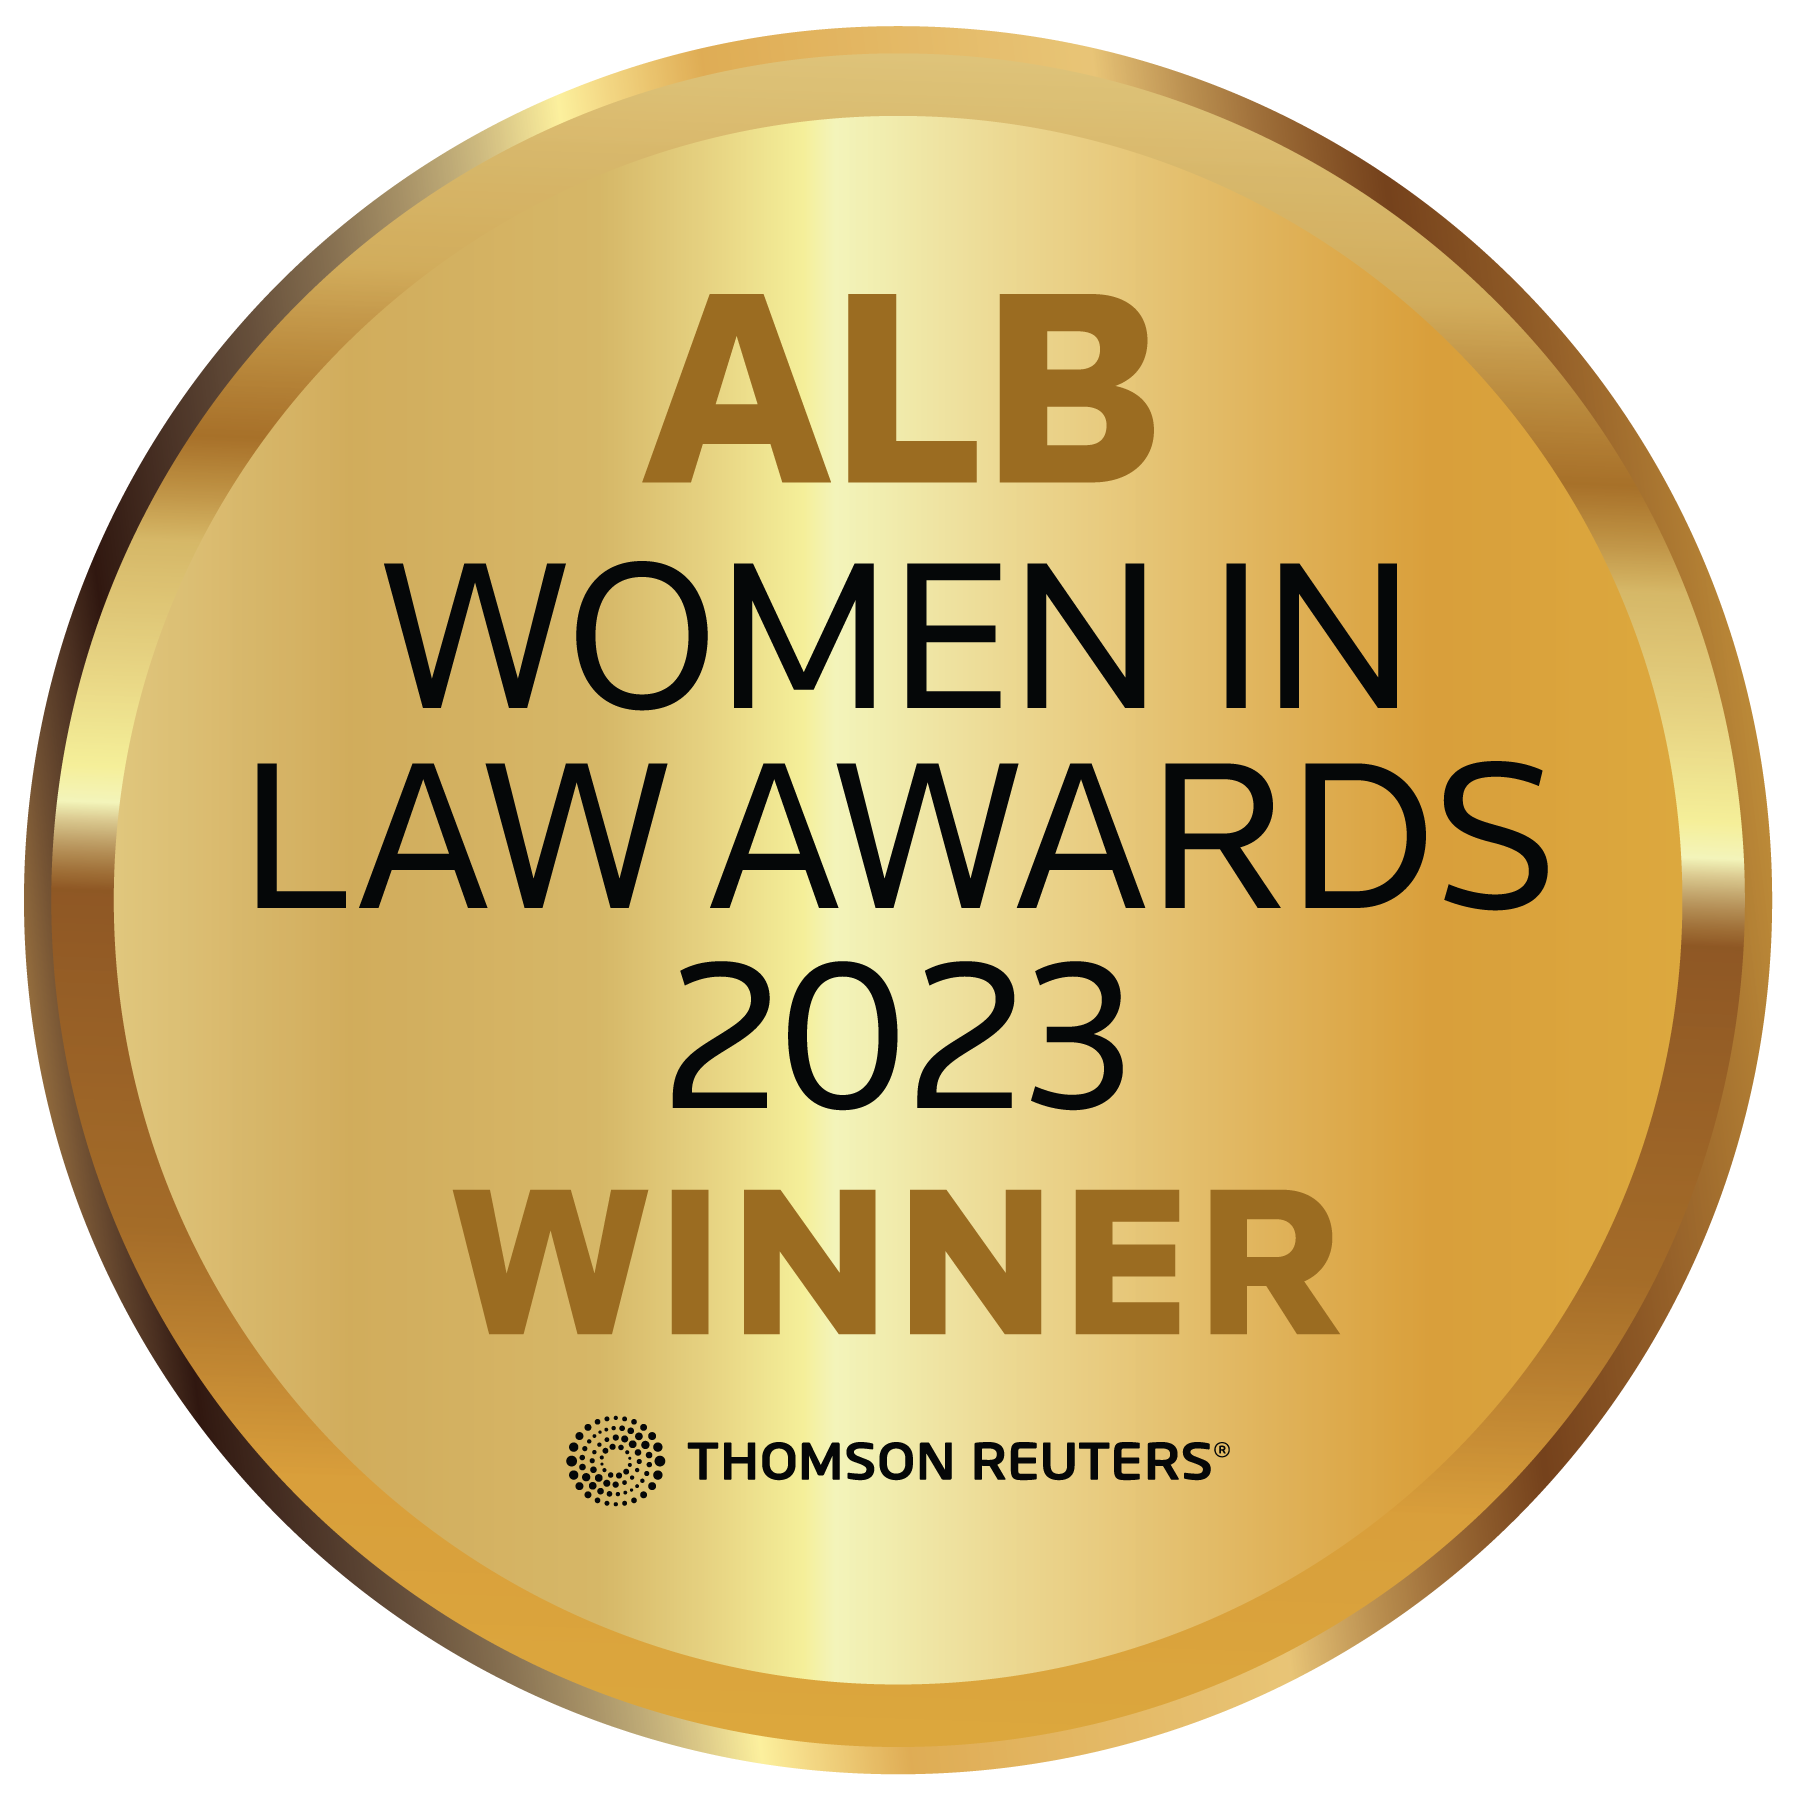 Most awards and most nominations at ALB Women in Law Awards 2023